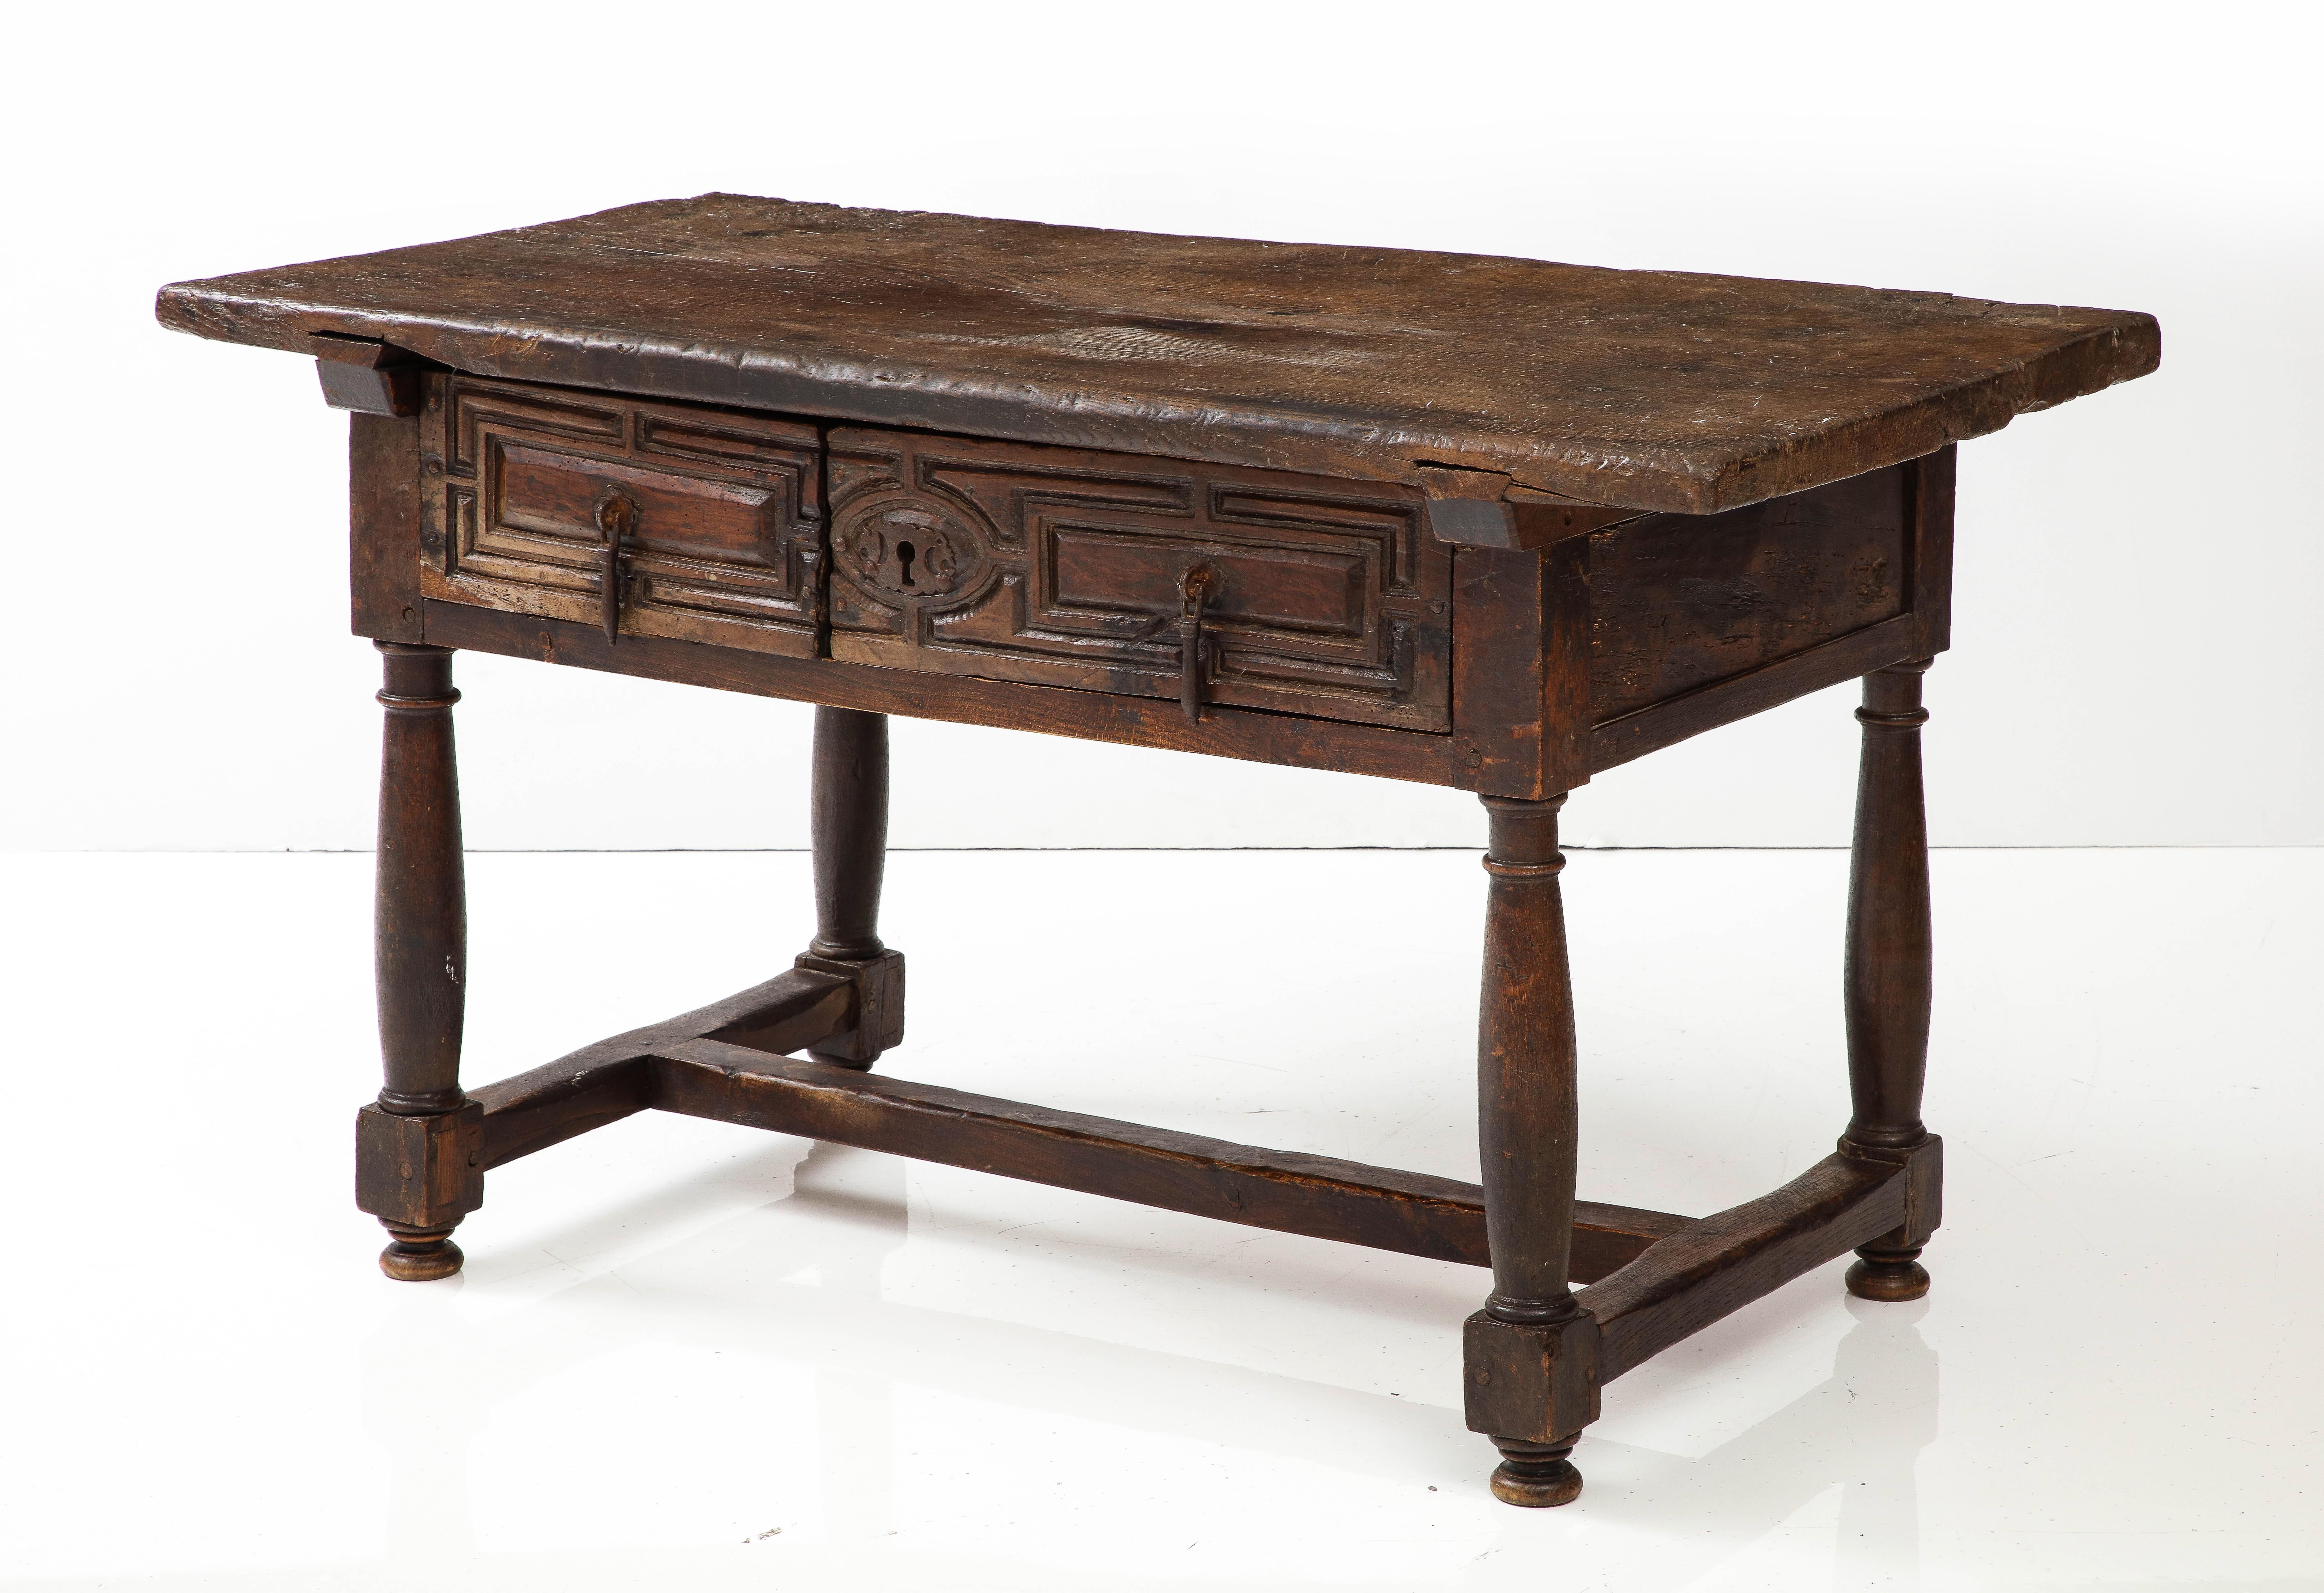 Late 16th C. Spanish Walnut Table with Iron Pulls & Drawers For Sale 2